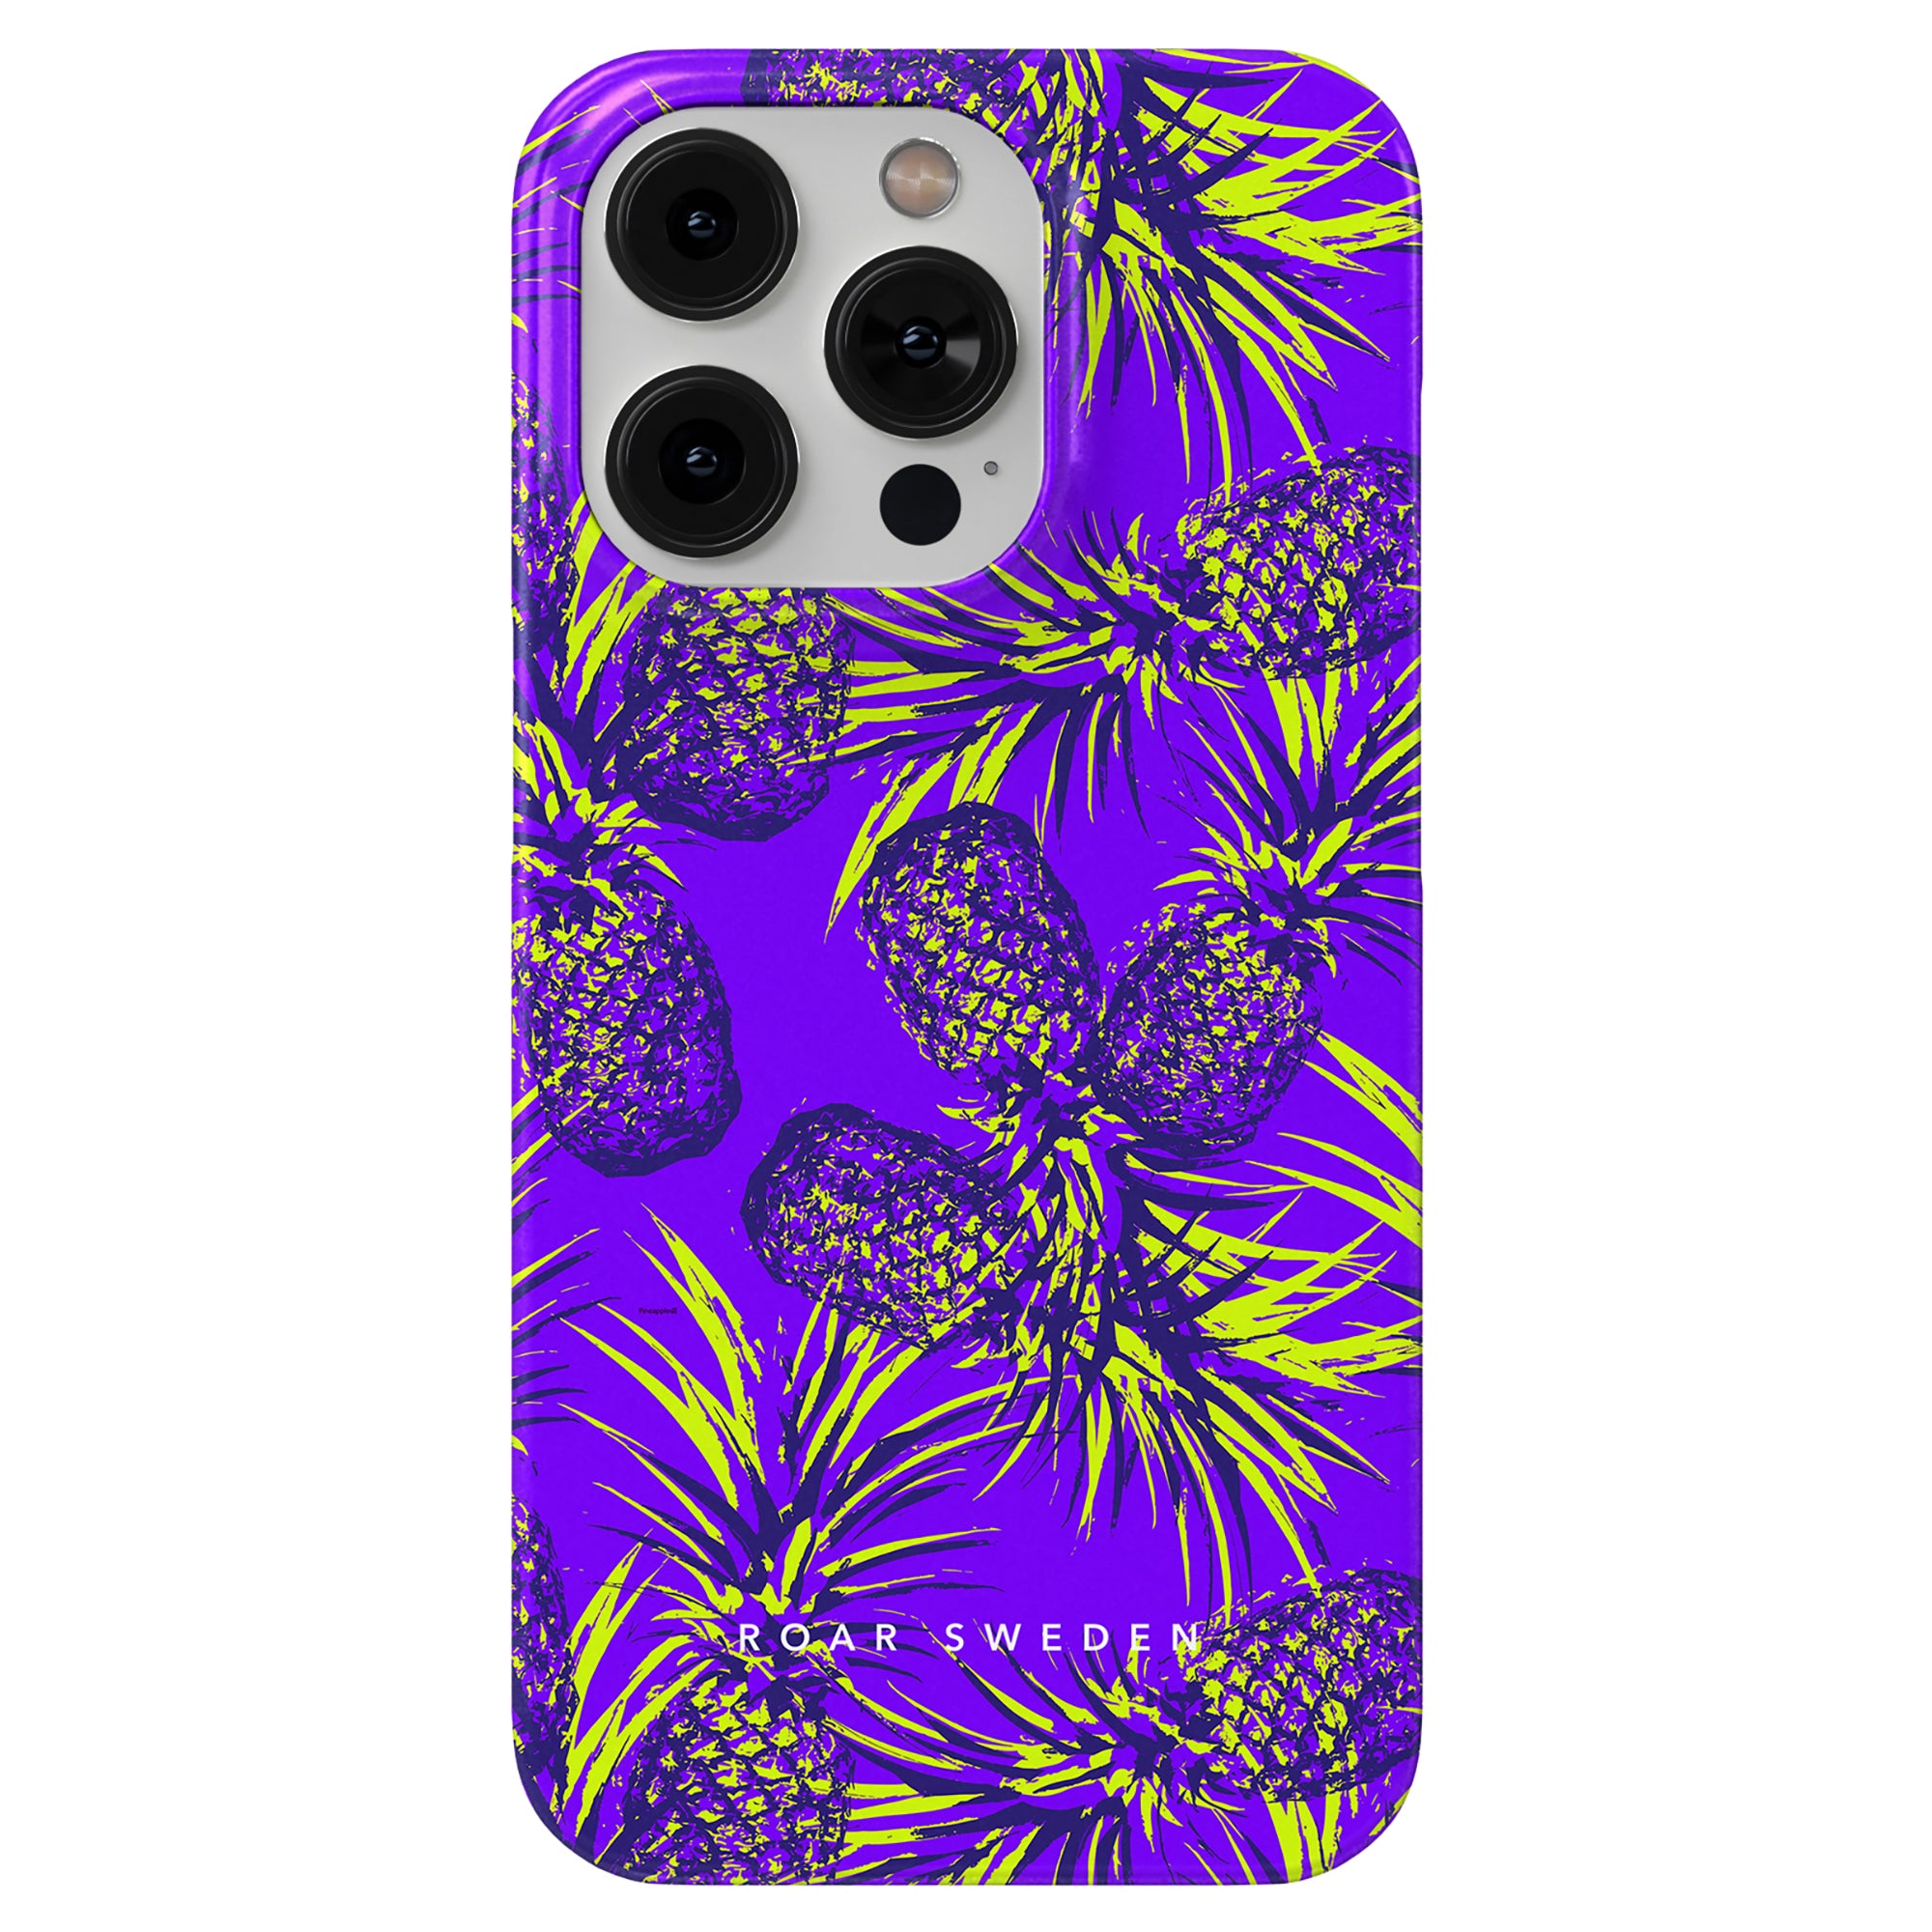 A smartphone with a vibrant purple and yellow Comosus slim case, perfect as a highlight in any SEO-focused product description.